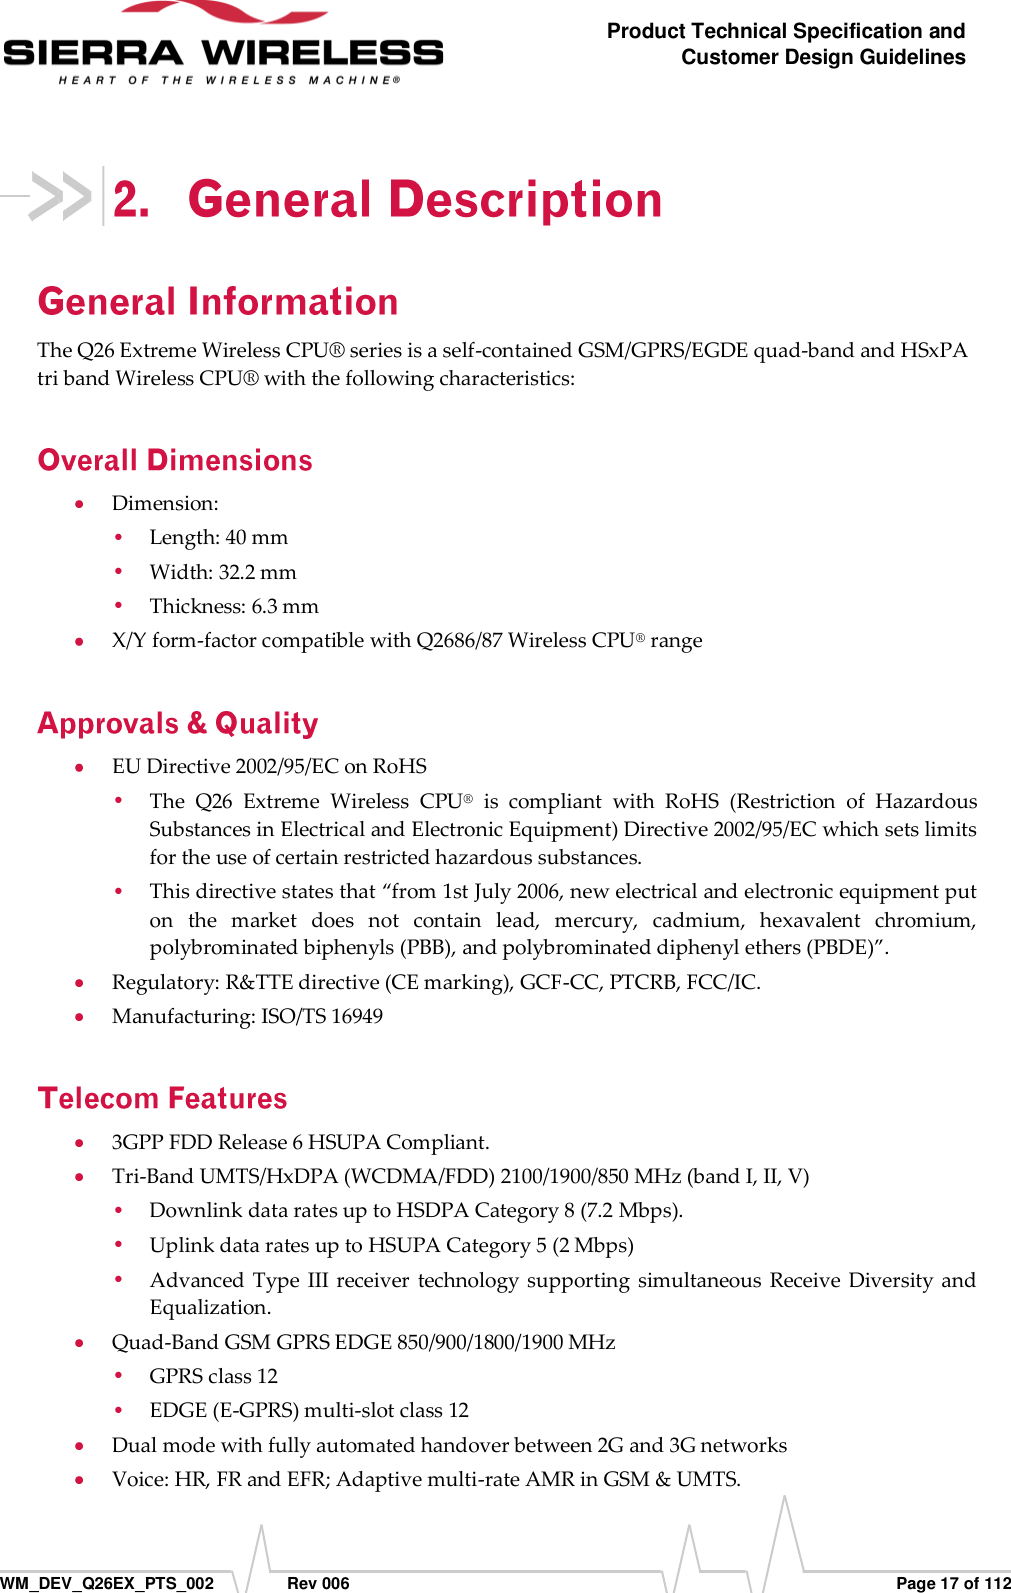      WM_DEV_Q26EX_PTS_002  Rev 006  Page 17 of 112 Product Technical Specification and Customer Design Guidelines  The Q26 Extreme Wireless CPU® series is a self-contained GSM/GPRS/EGDE quad-band and HSxPA tri band Wireless CPU® with the following characteristics:  Dimension:  Length: 40 mm  Width: 32.2 mm  Thickness: 6.3 mm  X/Y form-factor compatible with Q2686/87 Wireless CPU® range  EU Directive 2002/95/EC on RoHS  The  Q26  Extreme  Wireless  CPU®  is  compliant  with  RoHS  (Restriction  of  Hazardous Substances in Electrical and Electronic Equipment) Directive 2002/95/EC which sets limits for the use of certain restricted hazardous substances.   This directive states that “from 1st July 2006, new electrical and electronic equipment put on  the  market  does  not  contain  lead,  mercury,  cadmium,  hexavalent  chromium, polybrominated biphenyls (PBB), and polybrominated diphenyl ethers (PBDE)”.  Regulatory: R&amp;TTE directive (CE marking), GCF-CC, PTCRB, FCC/IC.  Manufacturing: ISO/TS 16949  3GPP FDD Release 6 HSUPA Compliant.  Tri-Band UMTS/HxDPA (WCDMA/FDD) 2100/1900/850 MHz (band I, II, V)  Downlink data rates up to HSDPA Category 8 (7.2 Mbps).  Uplink data rates up to HSUPA Category 5 (2 Mbps)  Advanced  Type  III receiver  technology supporting simultaneous  Receive Diversity  and Equalization.  Quad-Band GSM GPRS EDGE 850/900/1800/1900 MHz  GPRS class 12  EDGE (E-GPRS) multi-slot class 12  Dual mode with fully automated handover between 2G and 3G networks   Voice: HR, FR and EFR; Adaptive multi-rate AMR in GSM &amp; UMTS. 